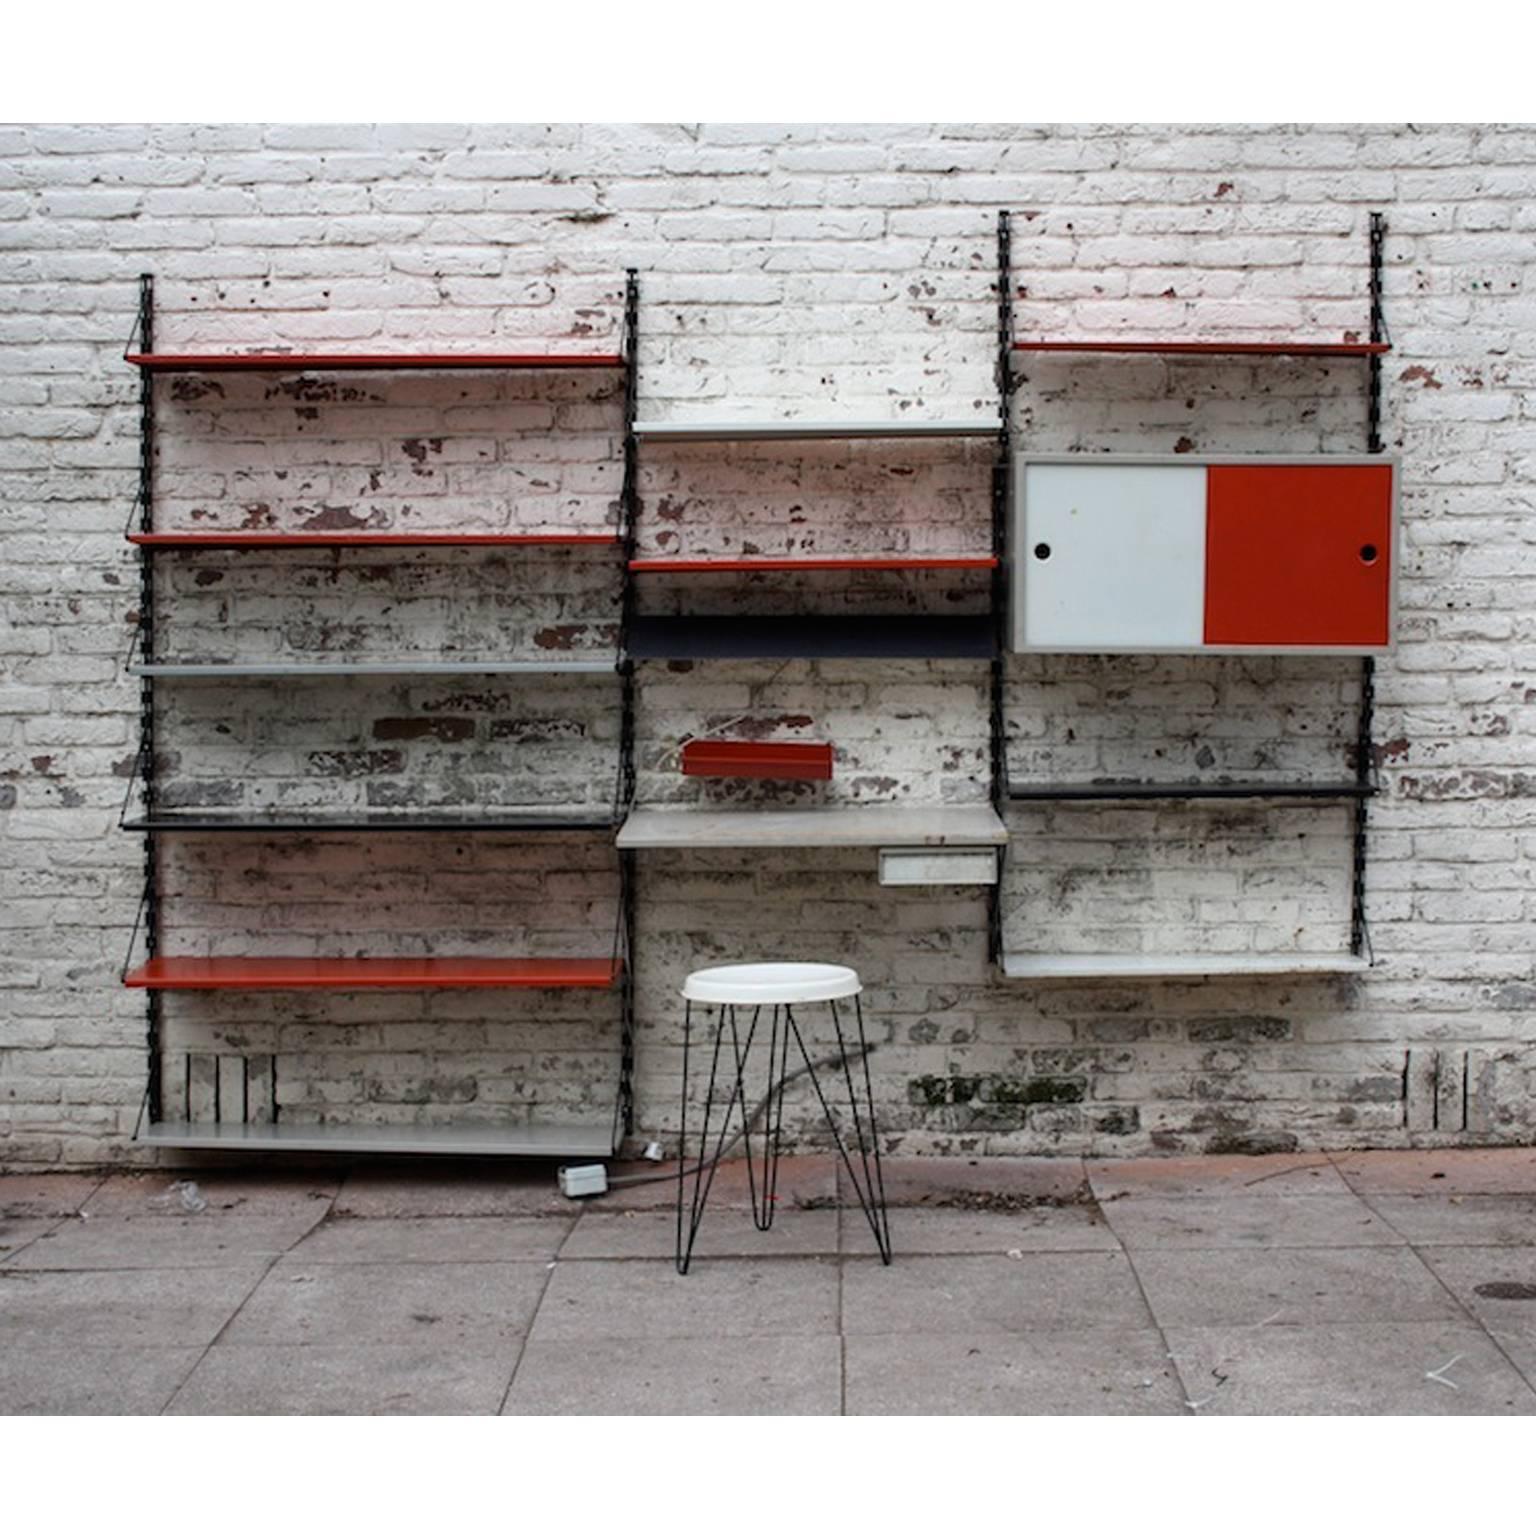 Wall system by Tjerk Reijenga for Pilastro, Dutch design 1955.

Beautiful Industrial Dutch wall system from the 1950s by Tjerk Reijenga for Pilastro.

Pilastro Furniture was started by Reijenga in 1955 to make a new modular wall unit in the same